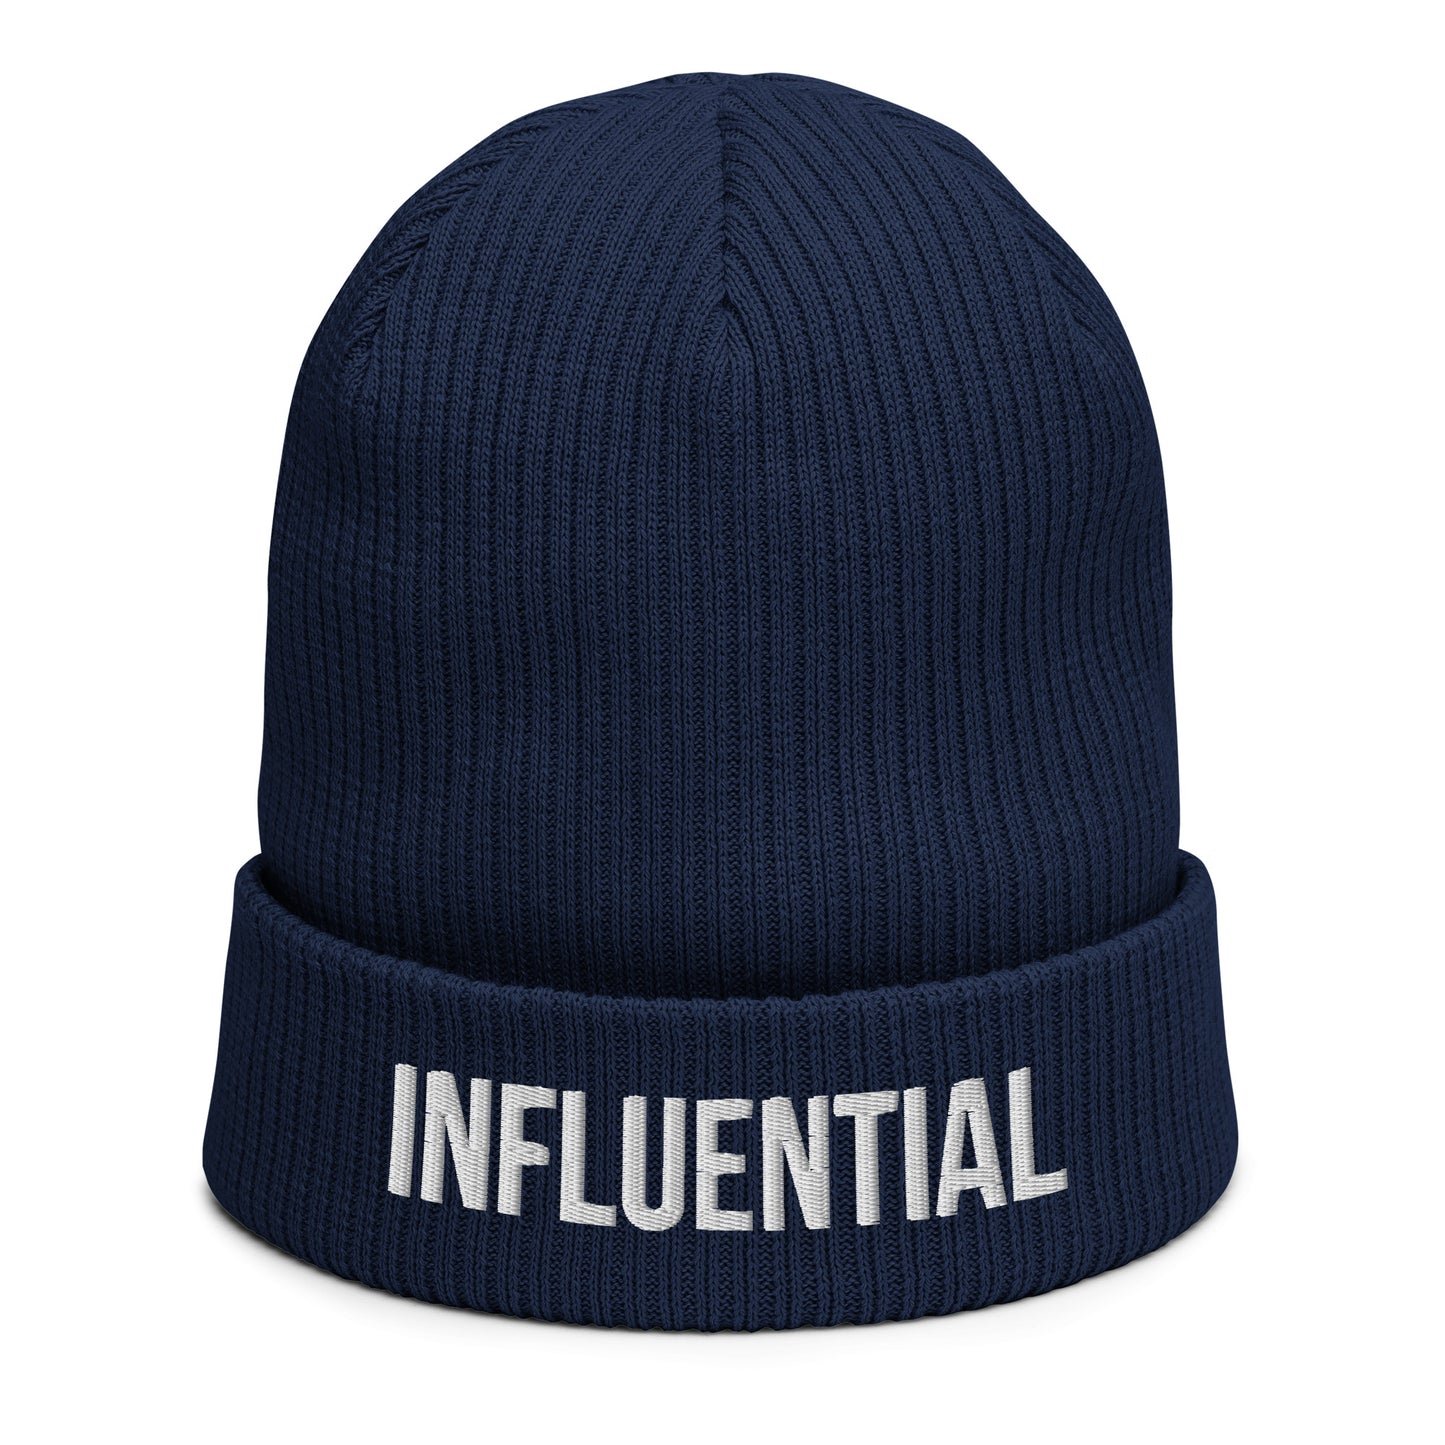 INFLUENTIAL (v1) Organic ribbed beanie (White Text)